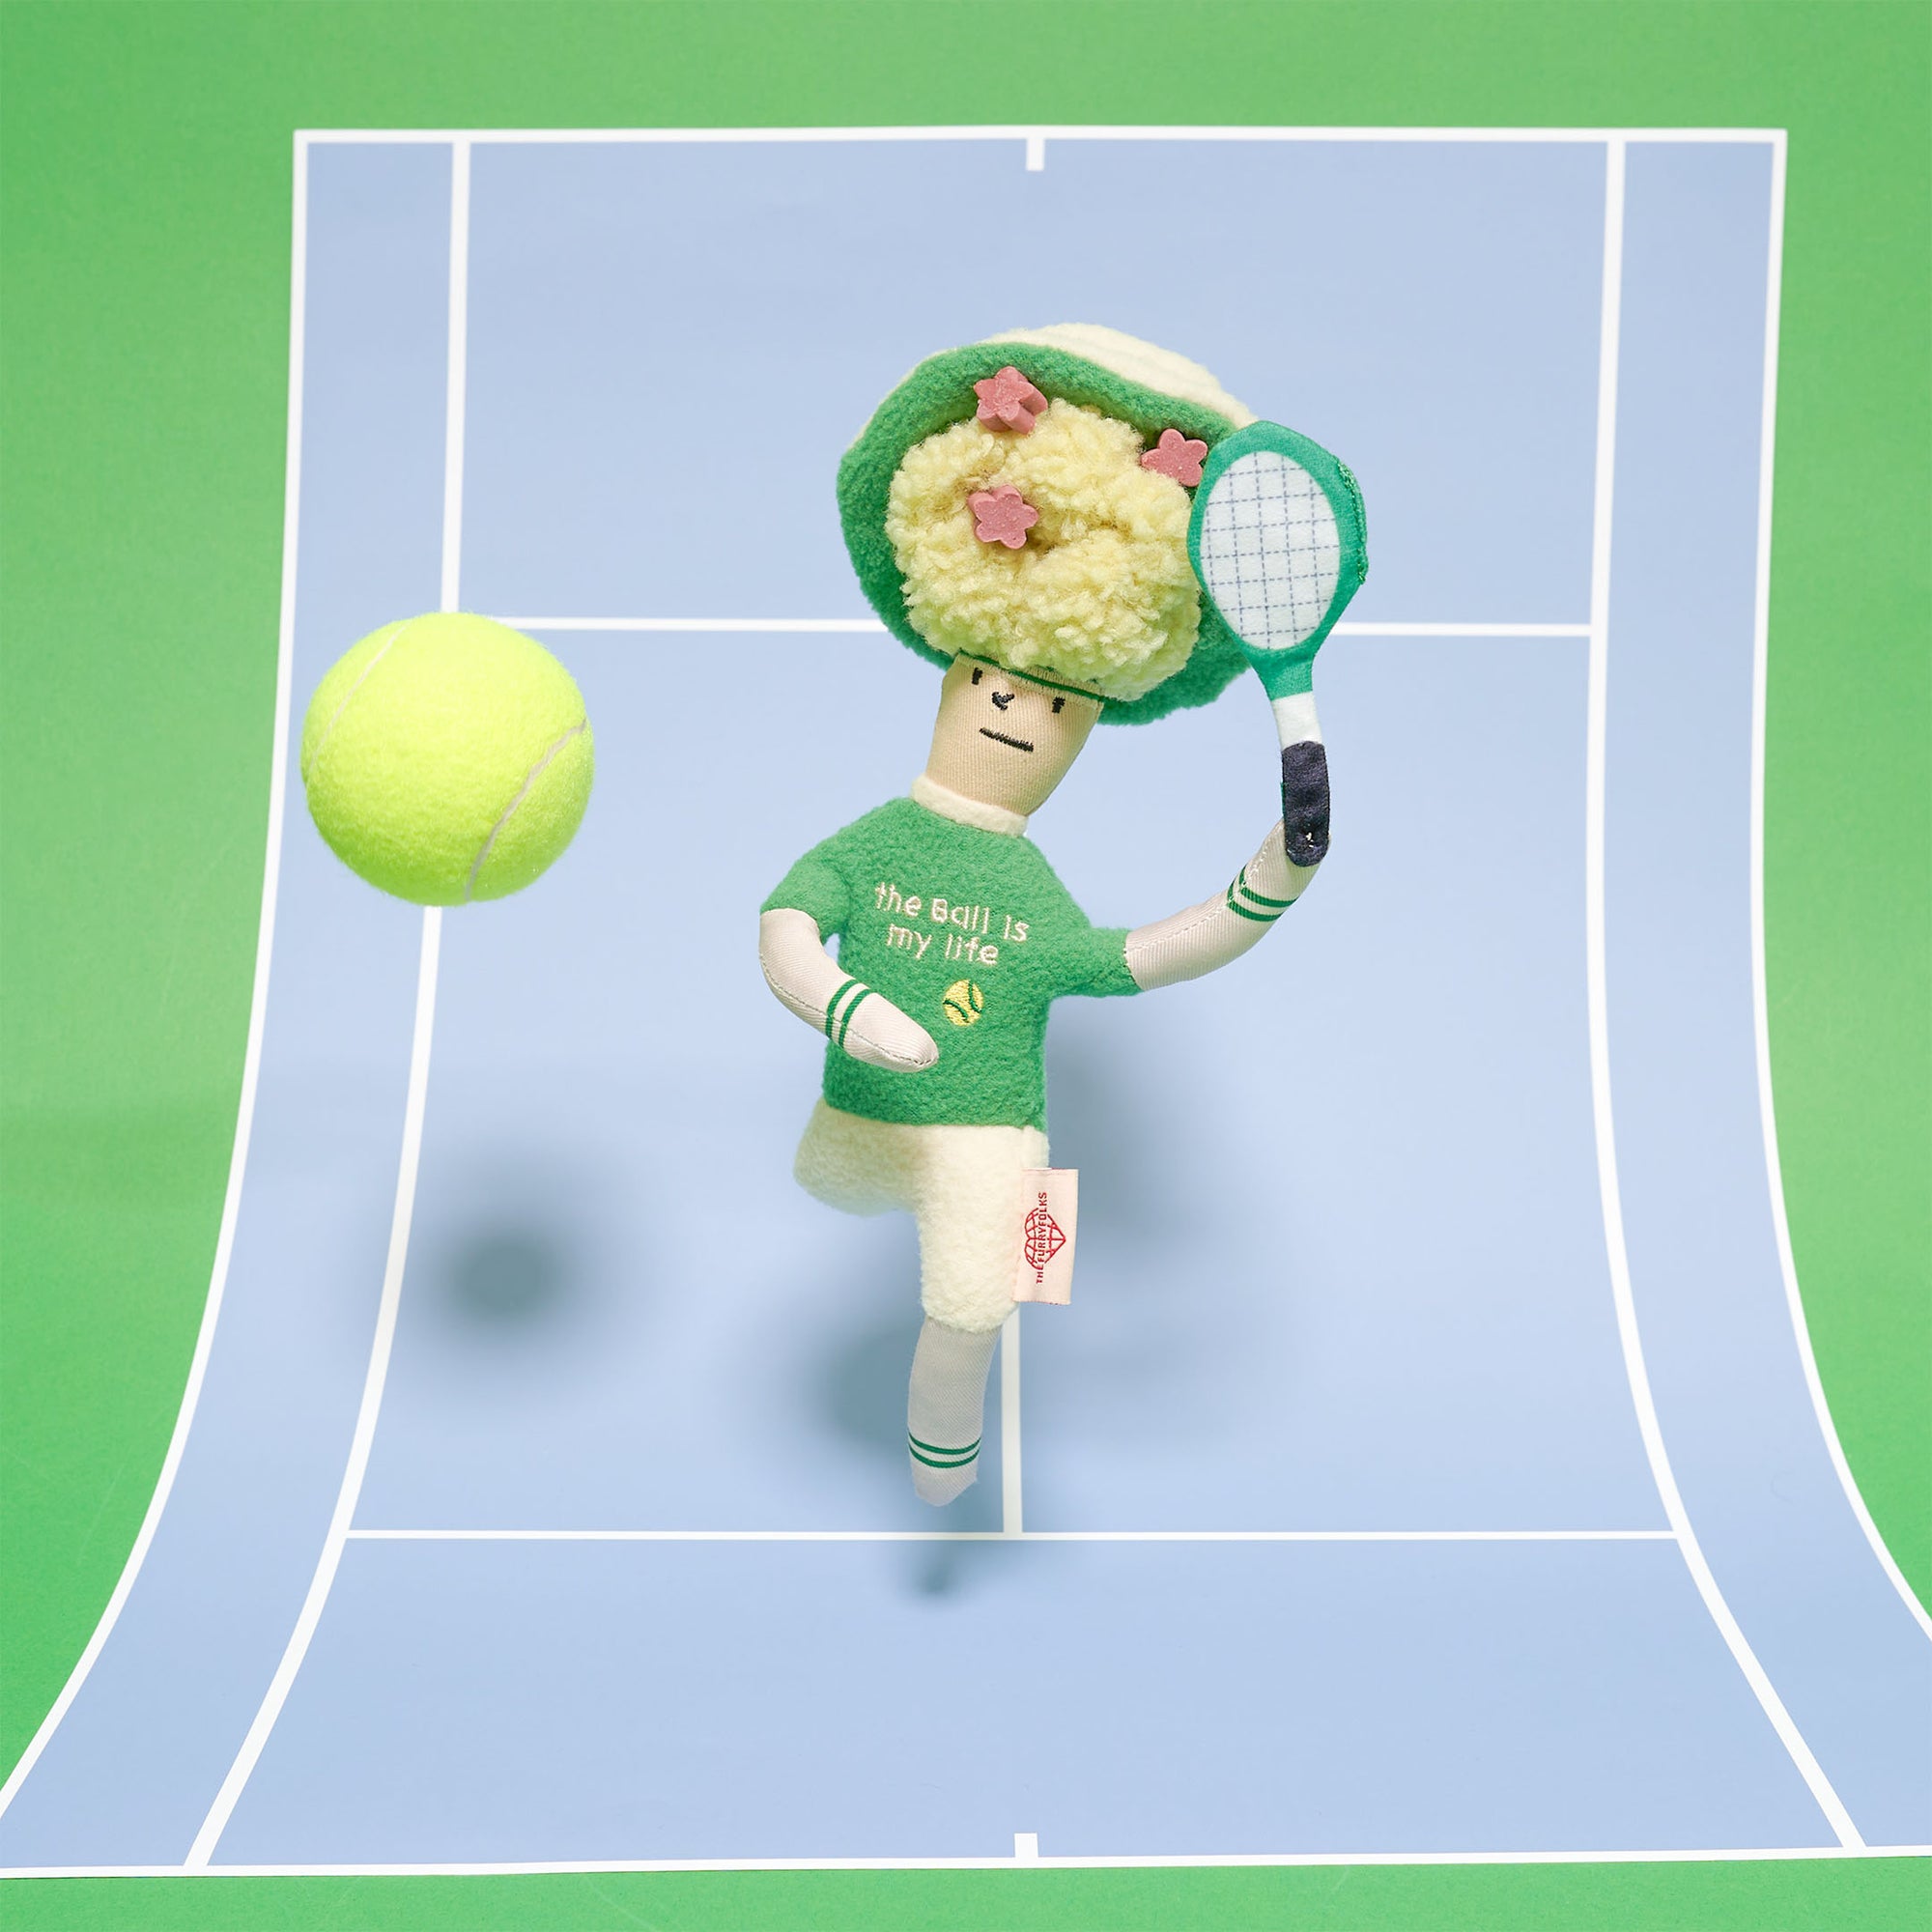 The toy is styled as a whimsical tennis player, complete with a green hat adorned with pink plush flowers, a green sweater with "the ball is my life" embroidered, and holding a white tennis racket. The figure has a stitched, simplistic face. A plush green tennis ball is depicted in motion, adding to the dynamic scene. The background is a graphic tennis court in vibrant greens, creating a playful and sporty setting.